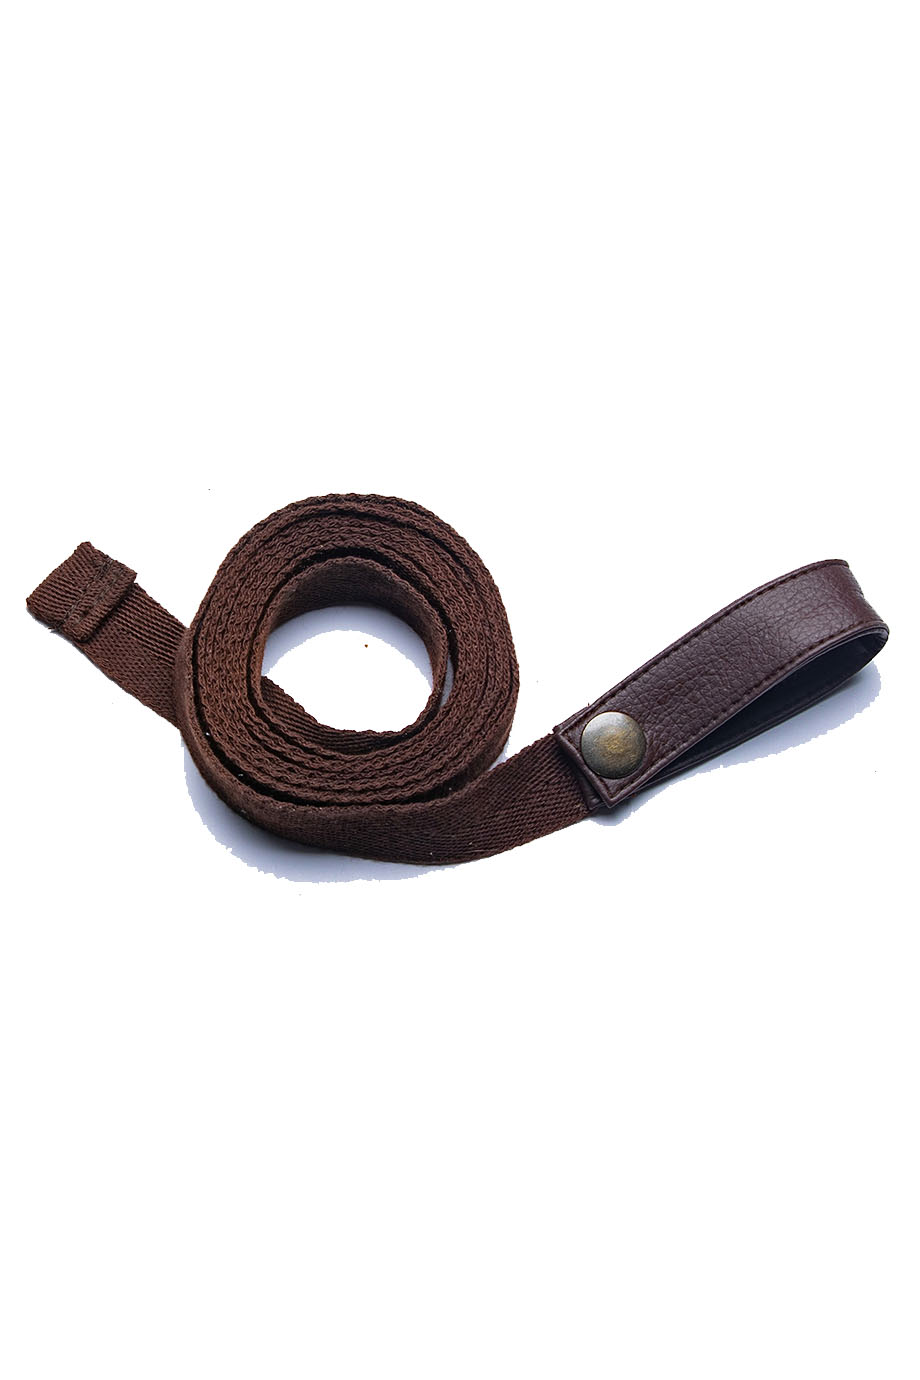 LEATHER APRON STRAPS (2-PACK)